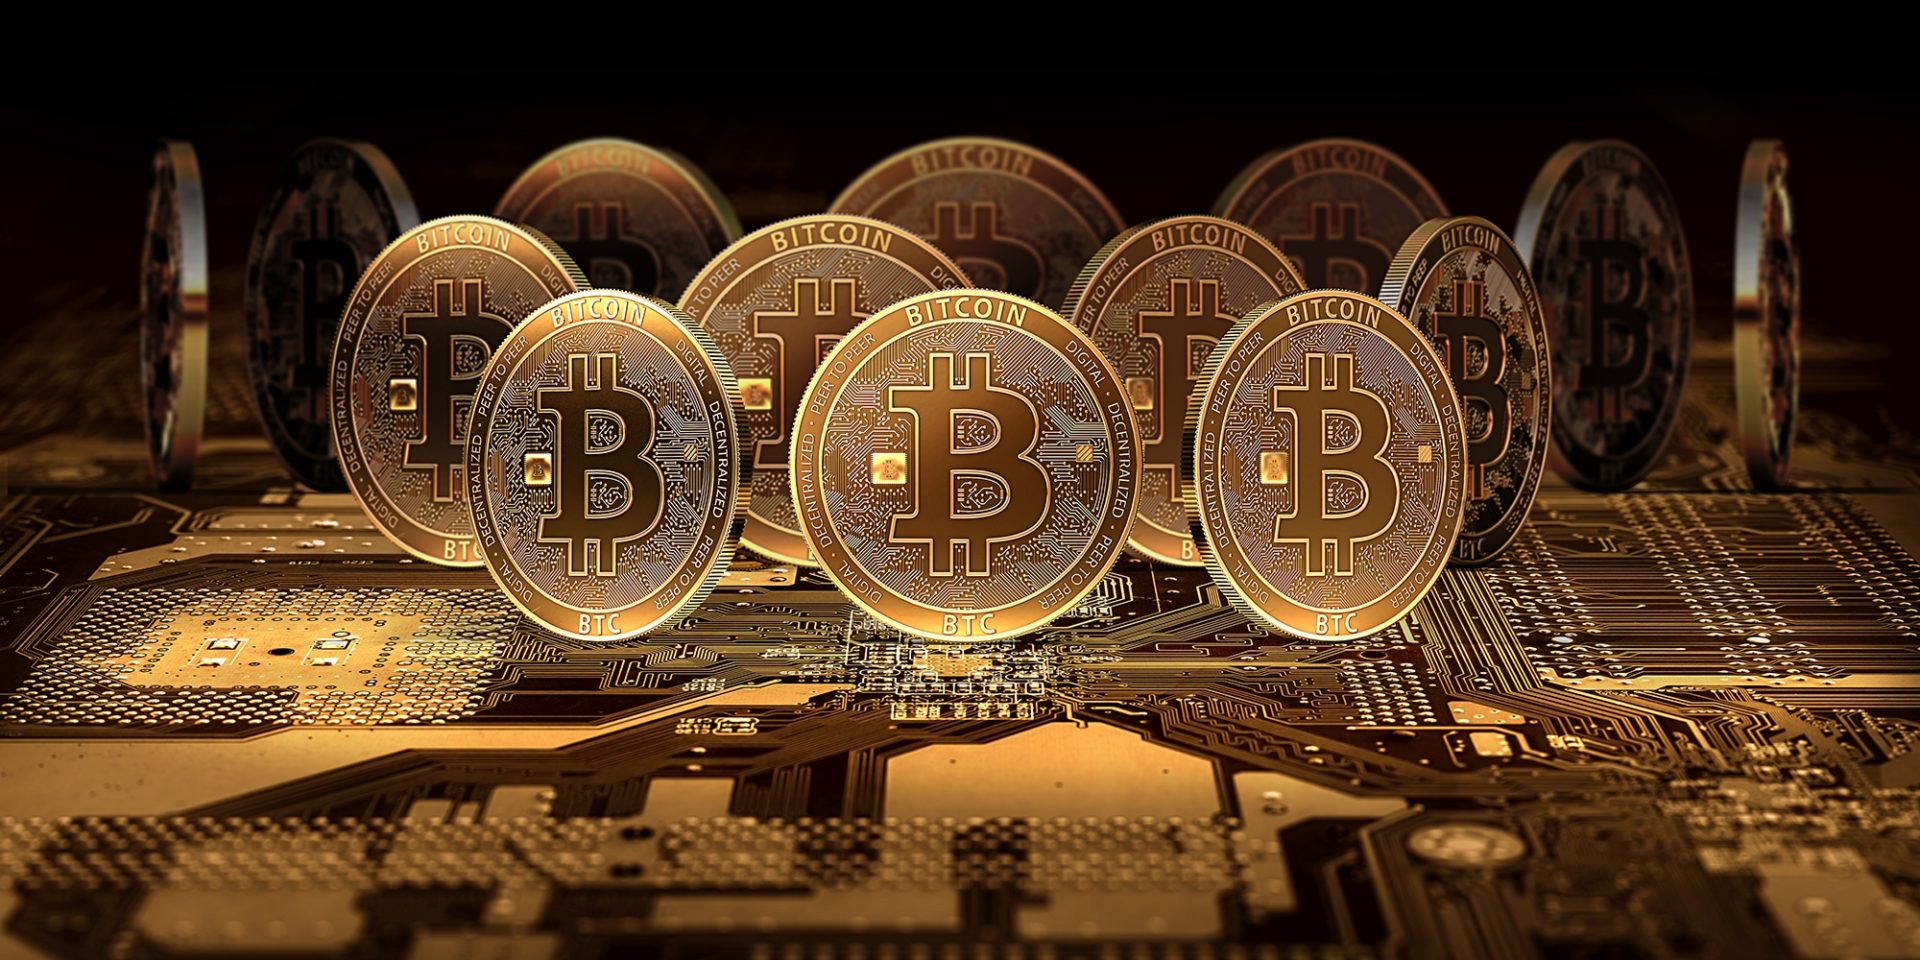 ABC’s Shark Tank Investor Links Bitcoin (BTC) To Real Estate, Says It will Eliminate Banks. 10